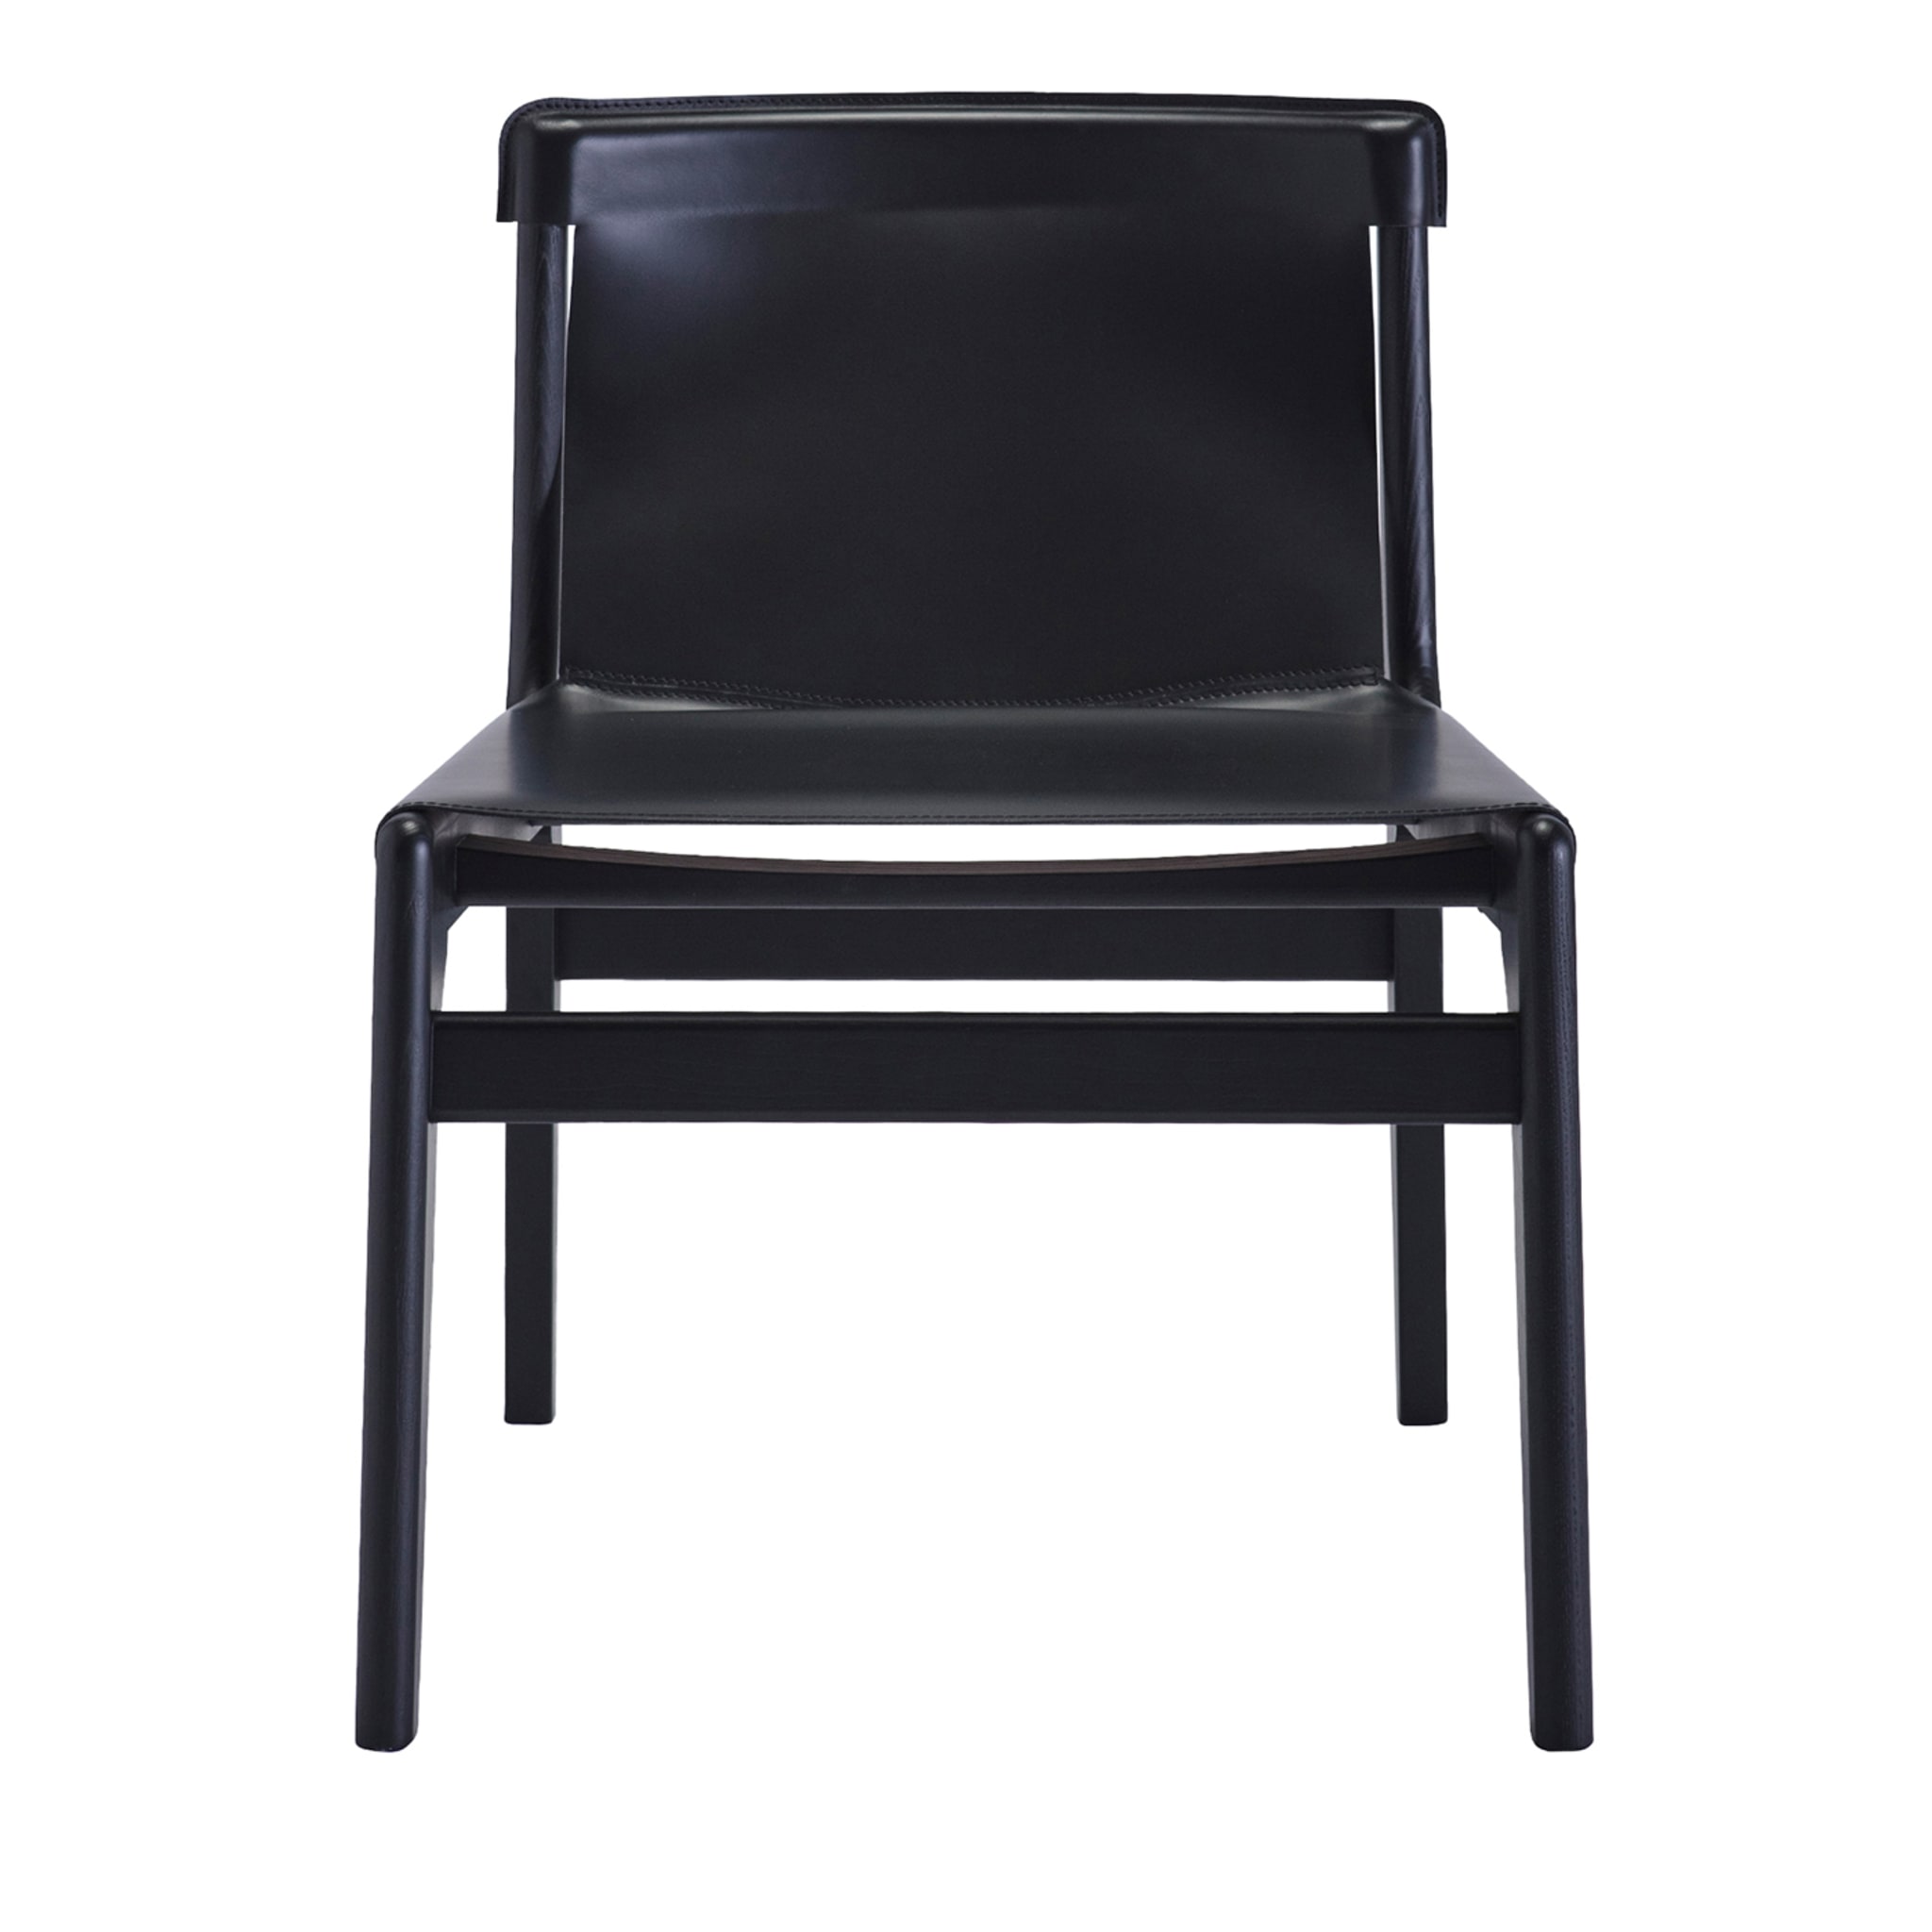 Burano Black Leather Lounge Chair by Balutto Associati - Main view